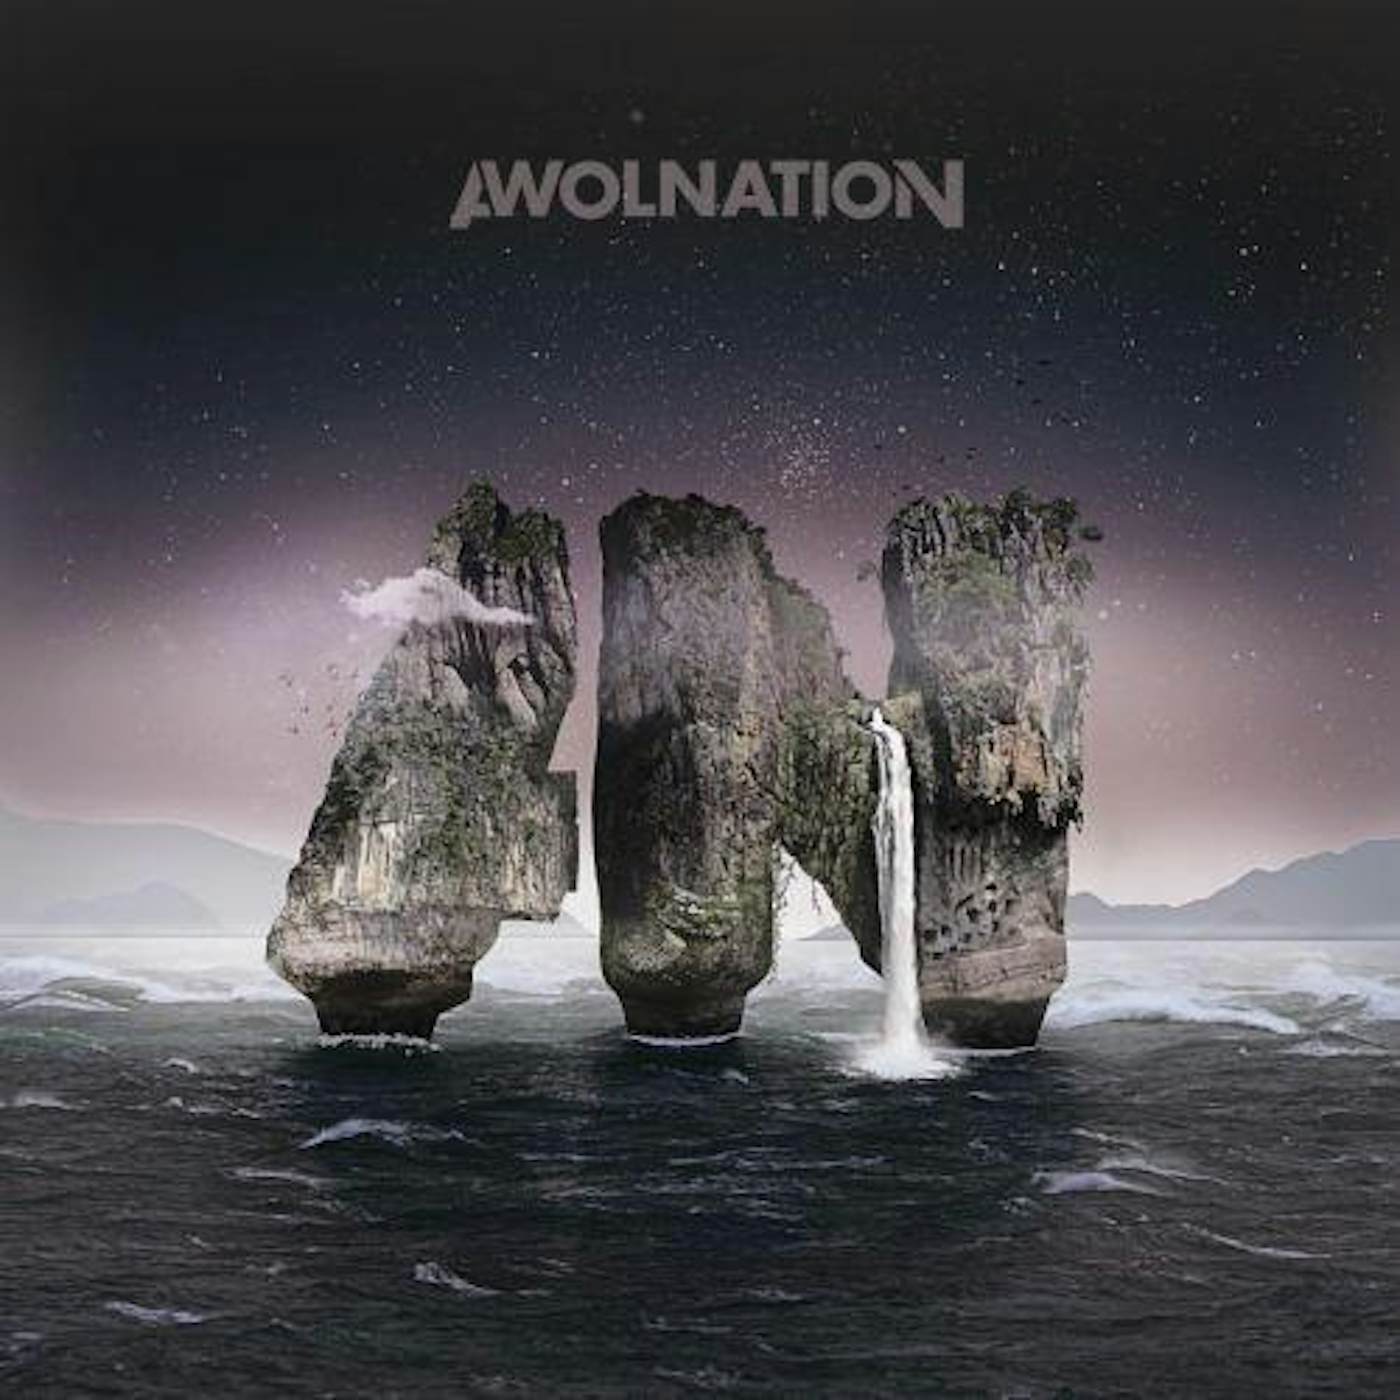 AWOLNATION MEGALITHIC SYMPHONY (10TH ANNIVERSARY DELUXE EDITION/3LP) Vinyl Record